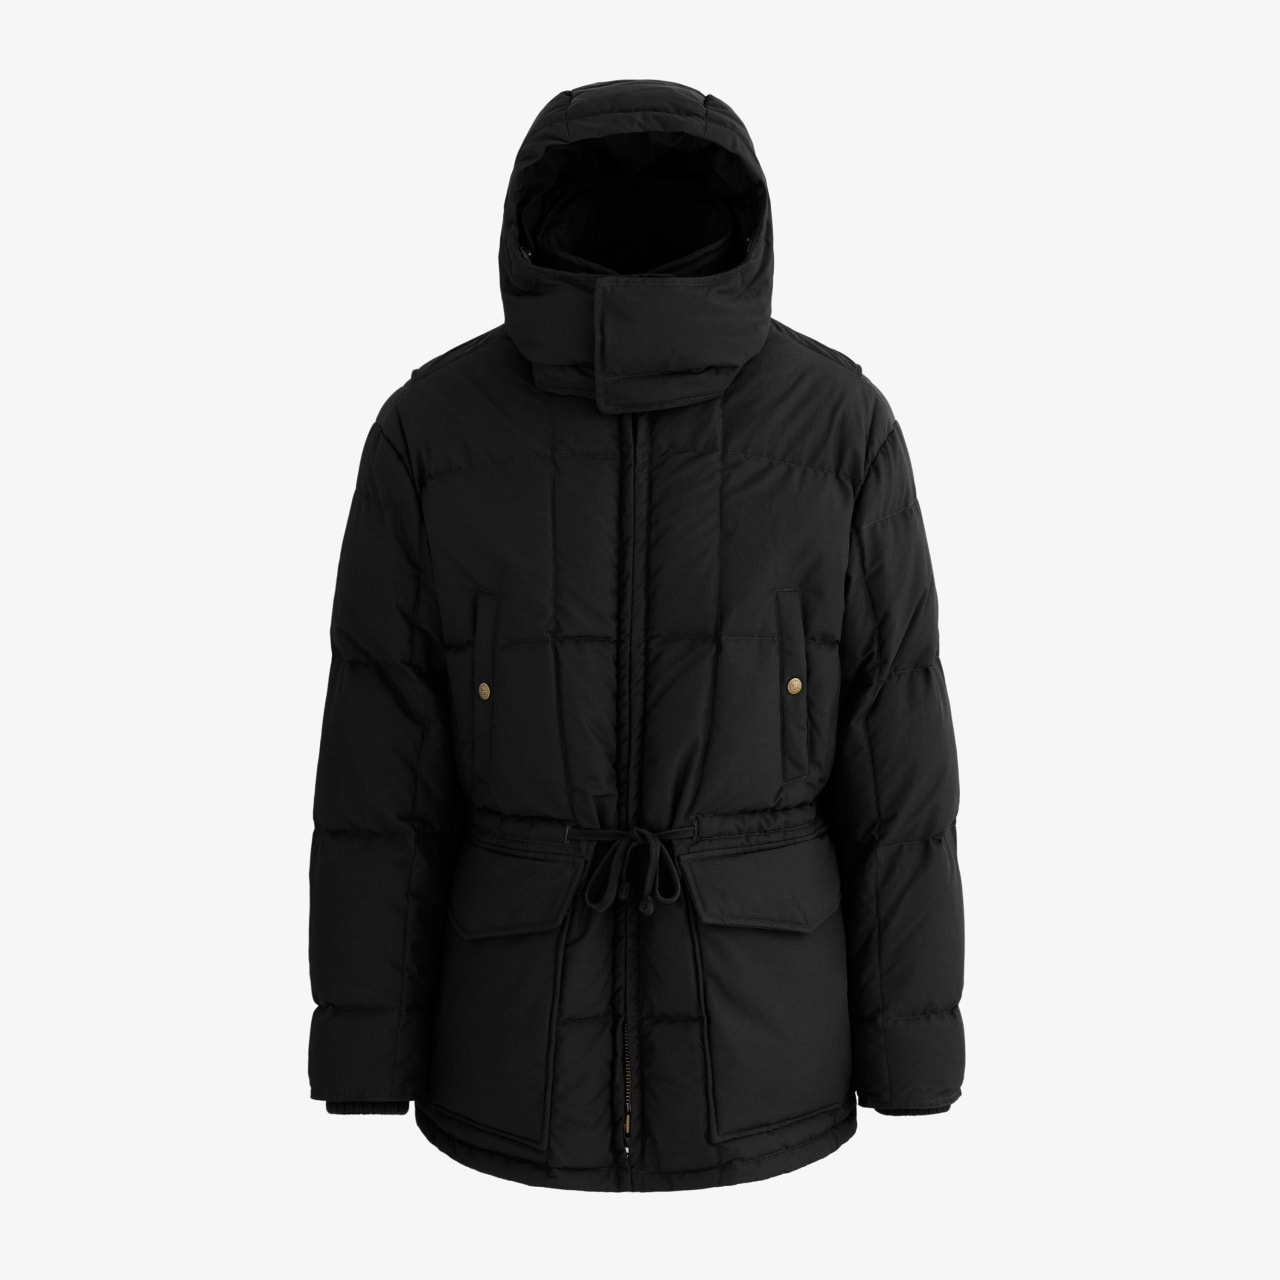 10 Best Down Jackets & Coats To Buy: Yeezy Gap to Moncler | Complex